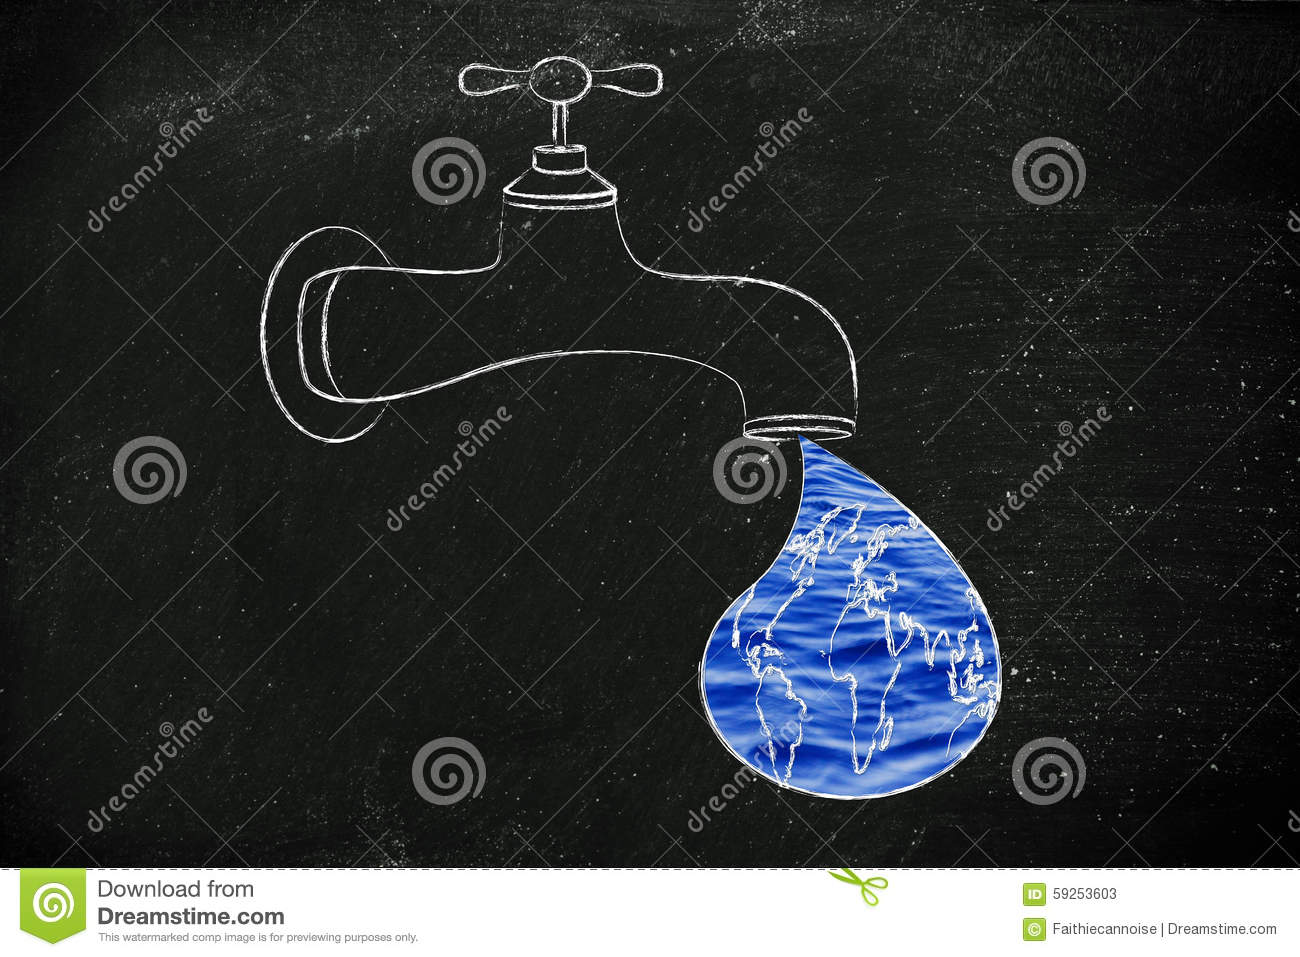 Planet Earth In A Droplet From The Tap  With Ocean Fill  Illustration